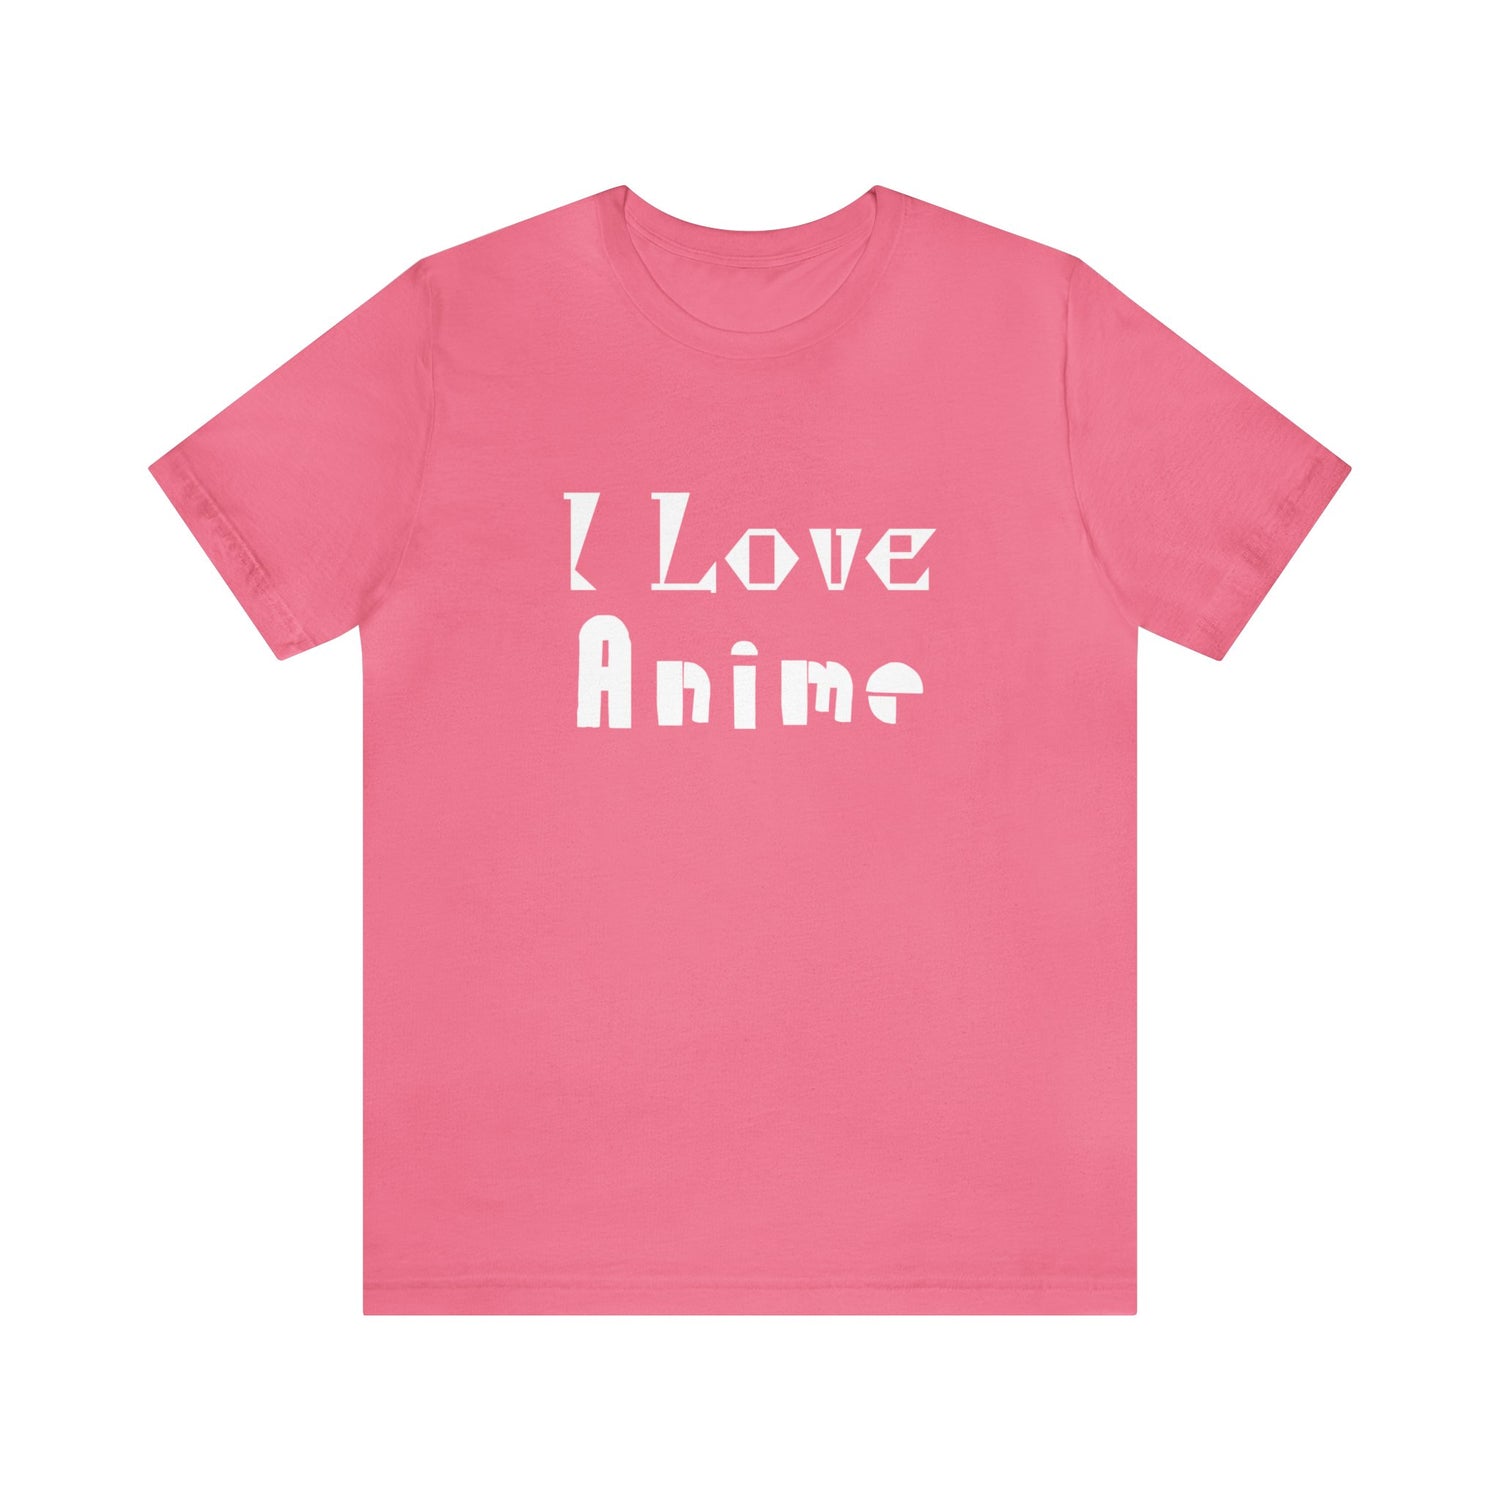 Anime T-Shirt For Minimalists | Japanese Animation Anime Lover Gift Idea Charity Pink T-Shirt Petrova Designs